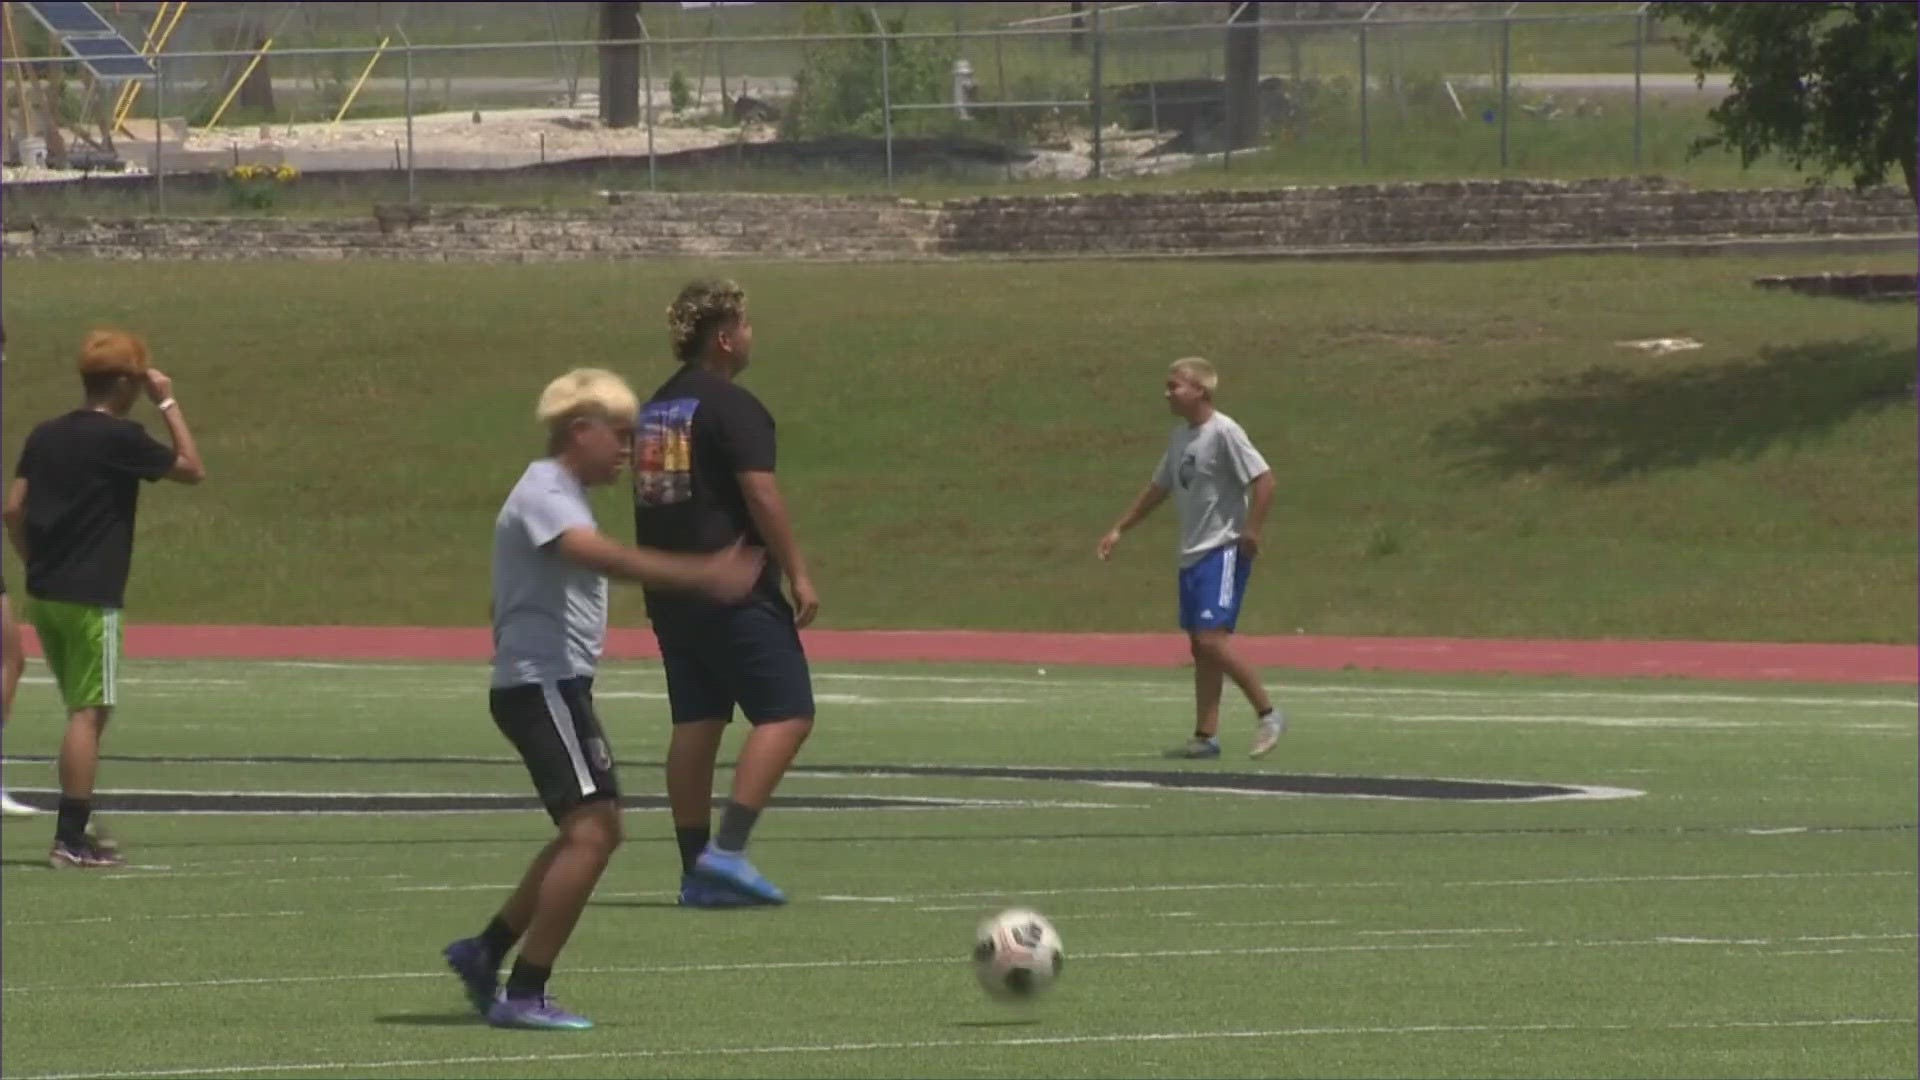 The resolution approved by the Austin City Council will increase funding for parks and youth recreational soccer programs.